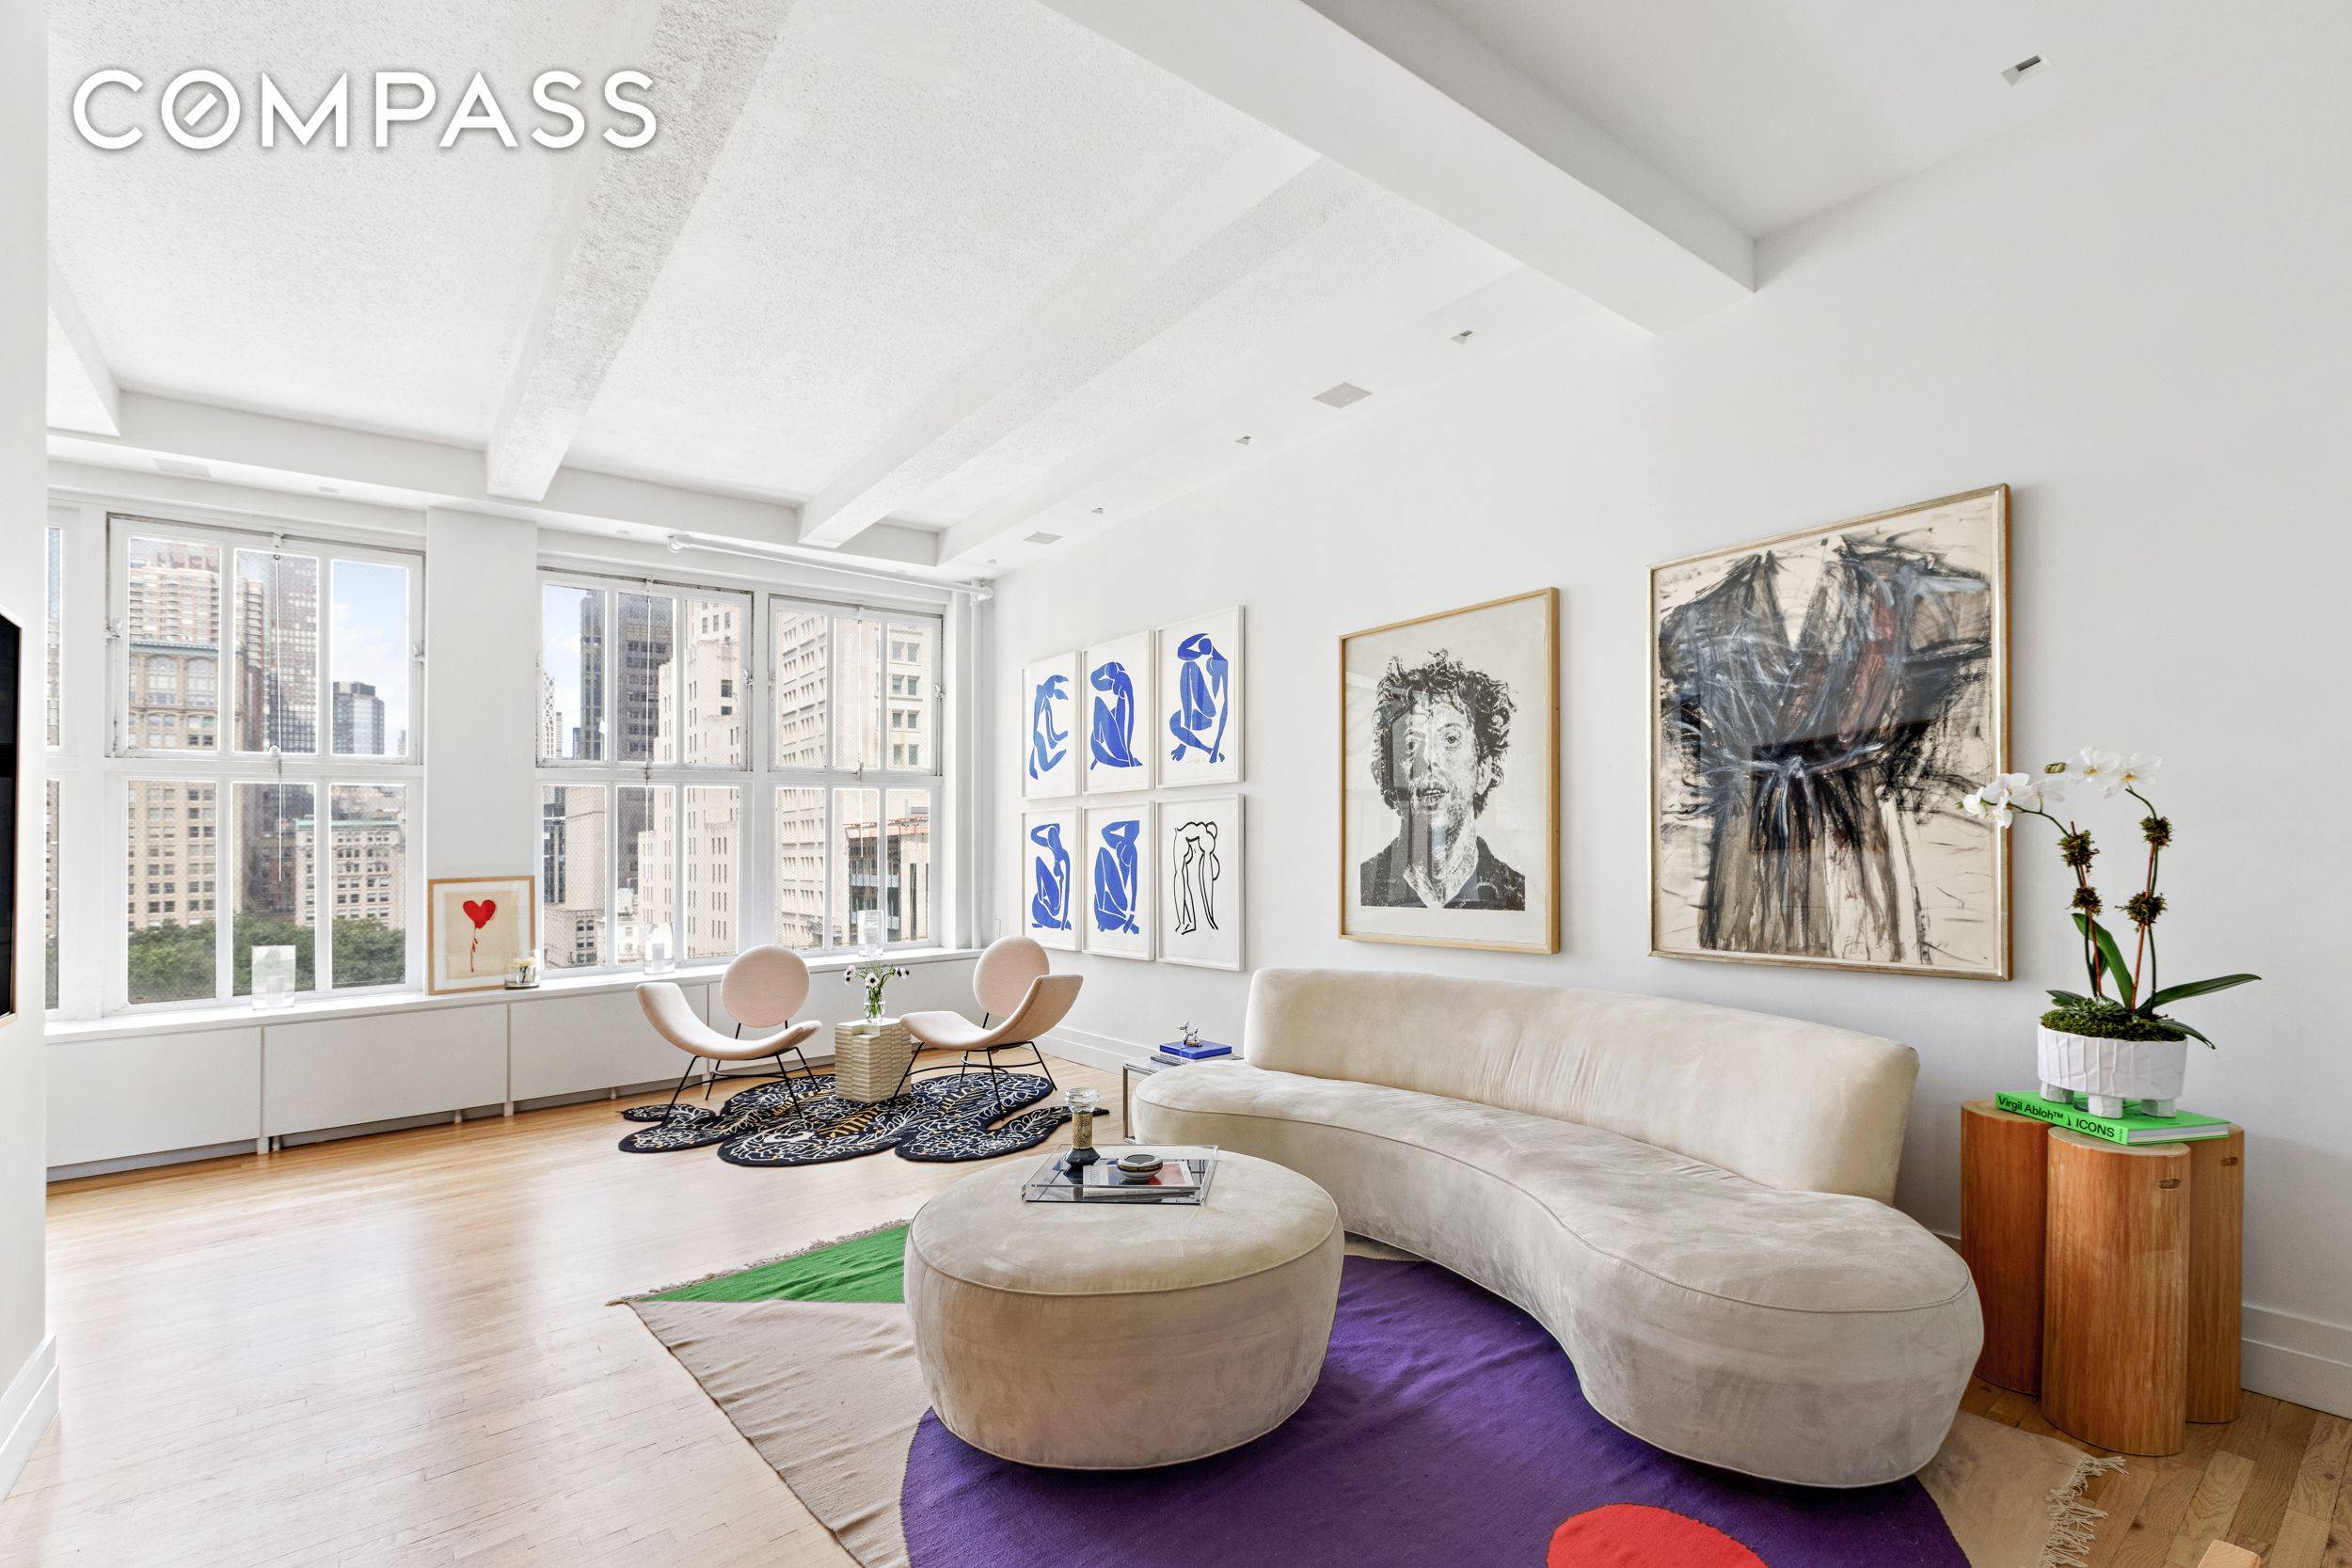 Madison Square Park vistas await in this beautiful two bedroom corner loft featuring 11 foot beamed ceilings, wonderful walls for displaying art, and tasteful finishes throughout.